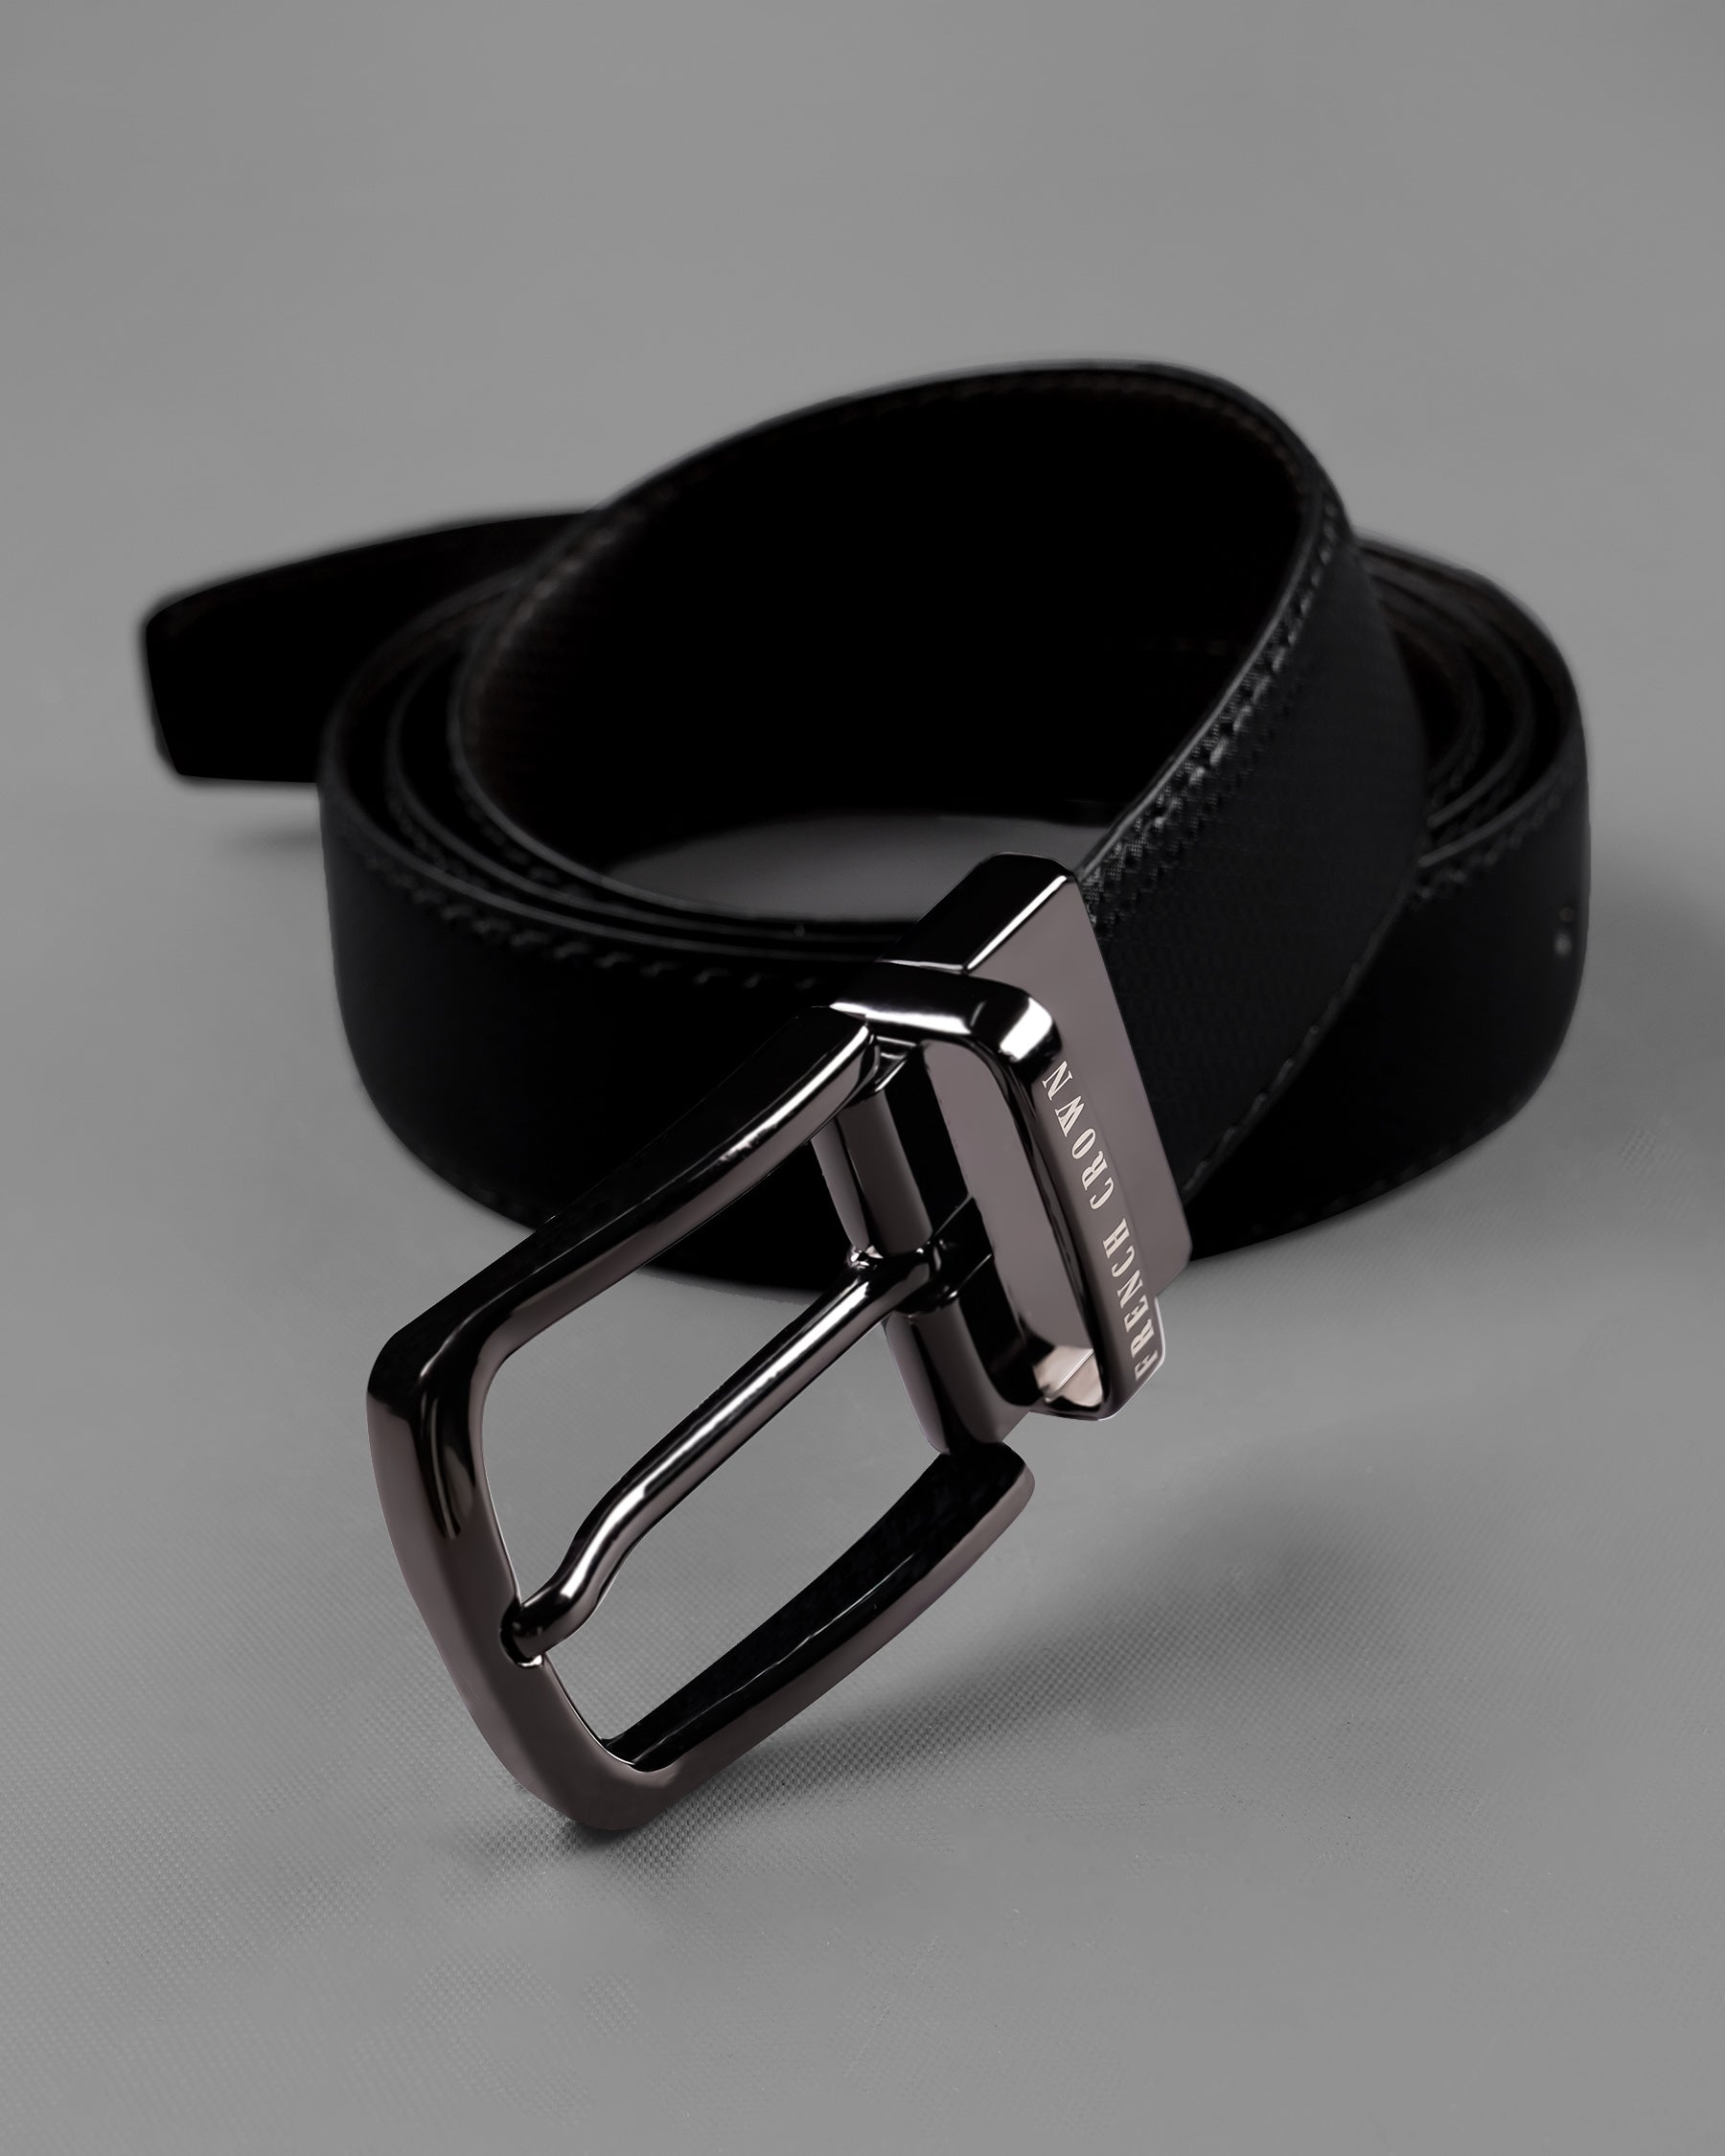 Metallic Black Buckle with Jade Black and Brown Leather Free Handcrafted Reversible Belt